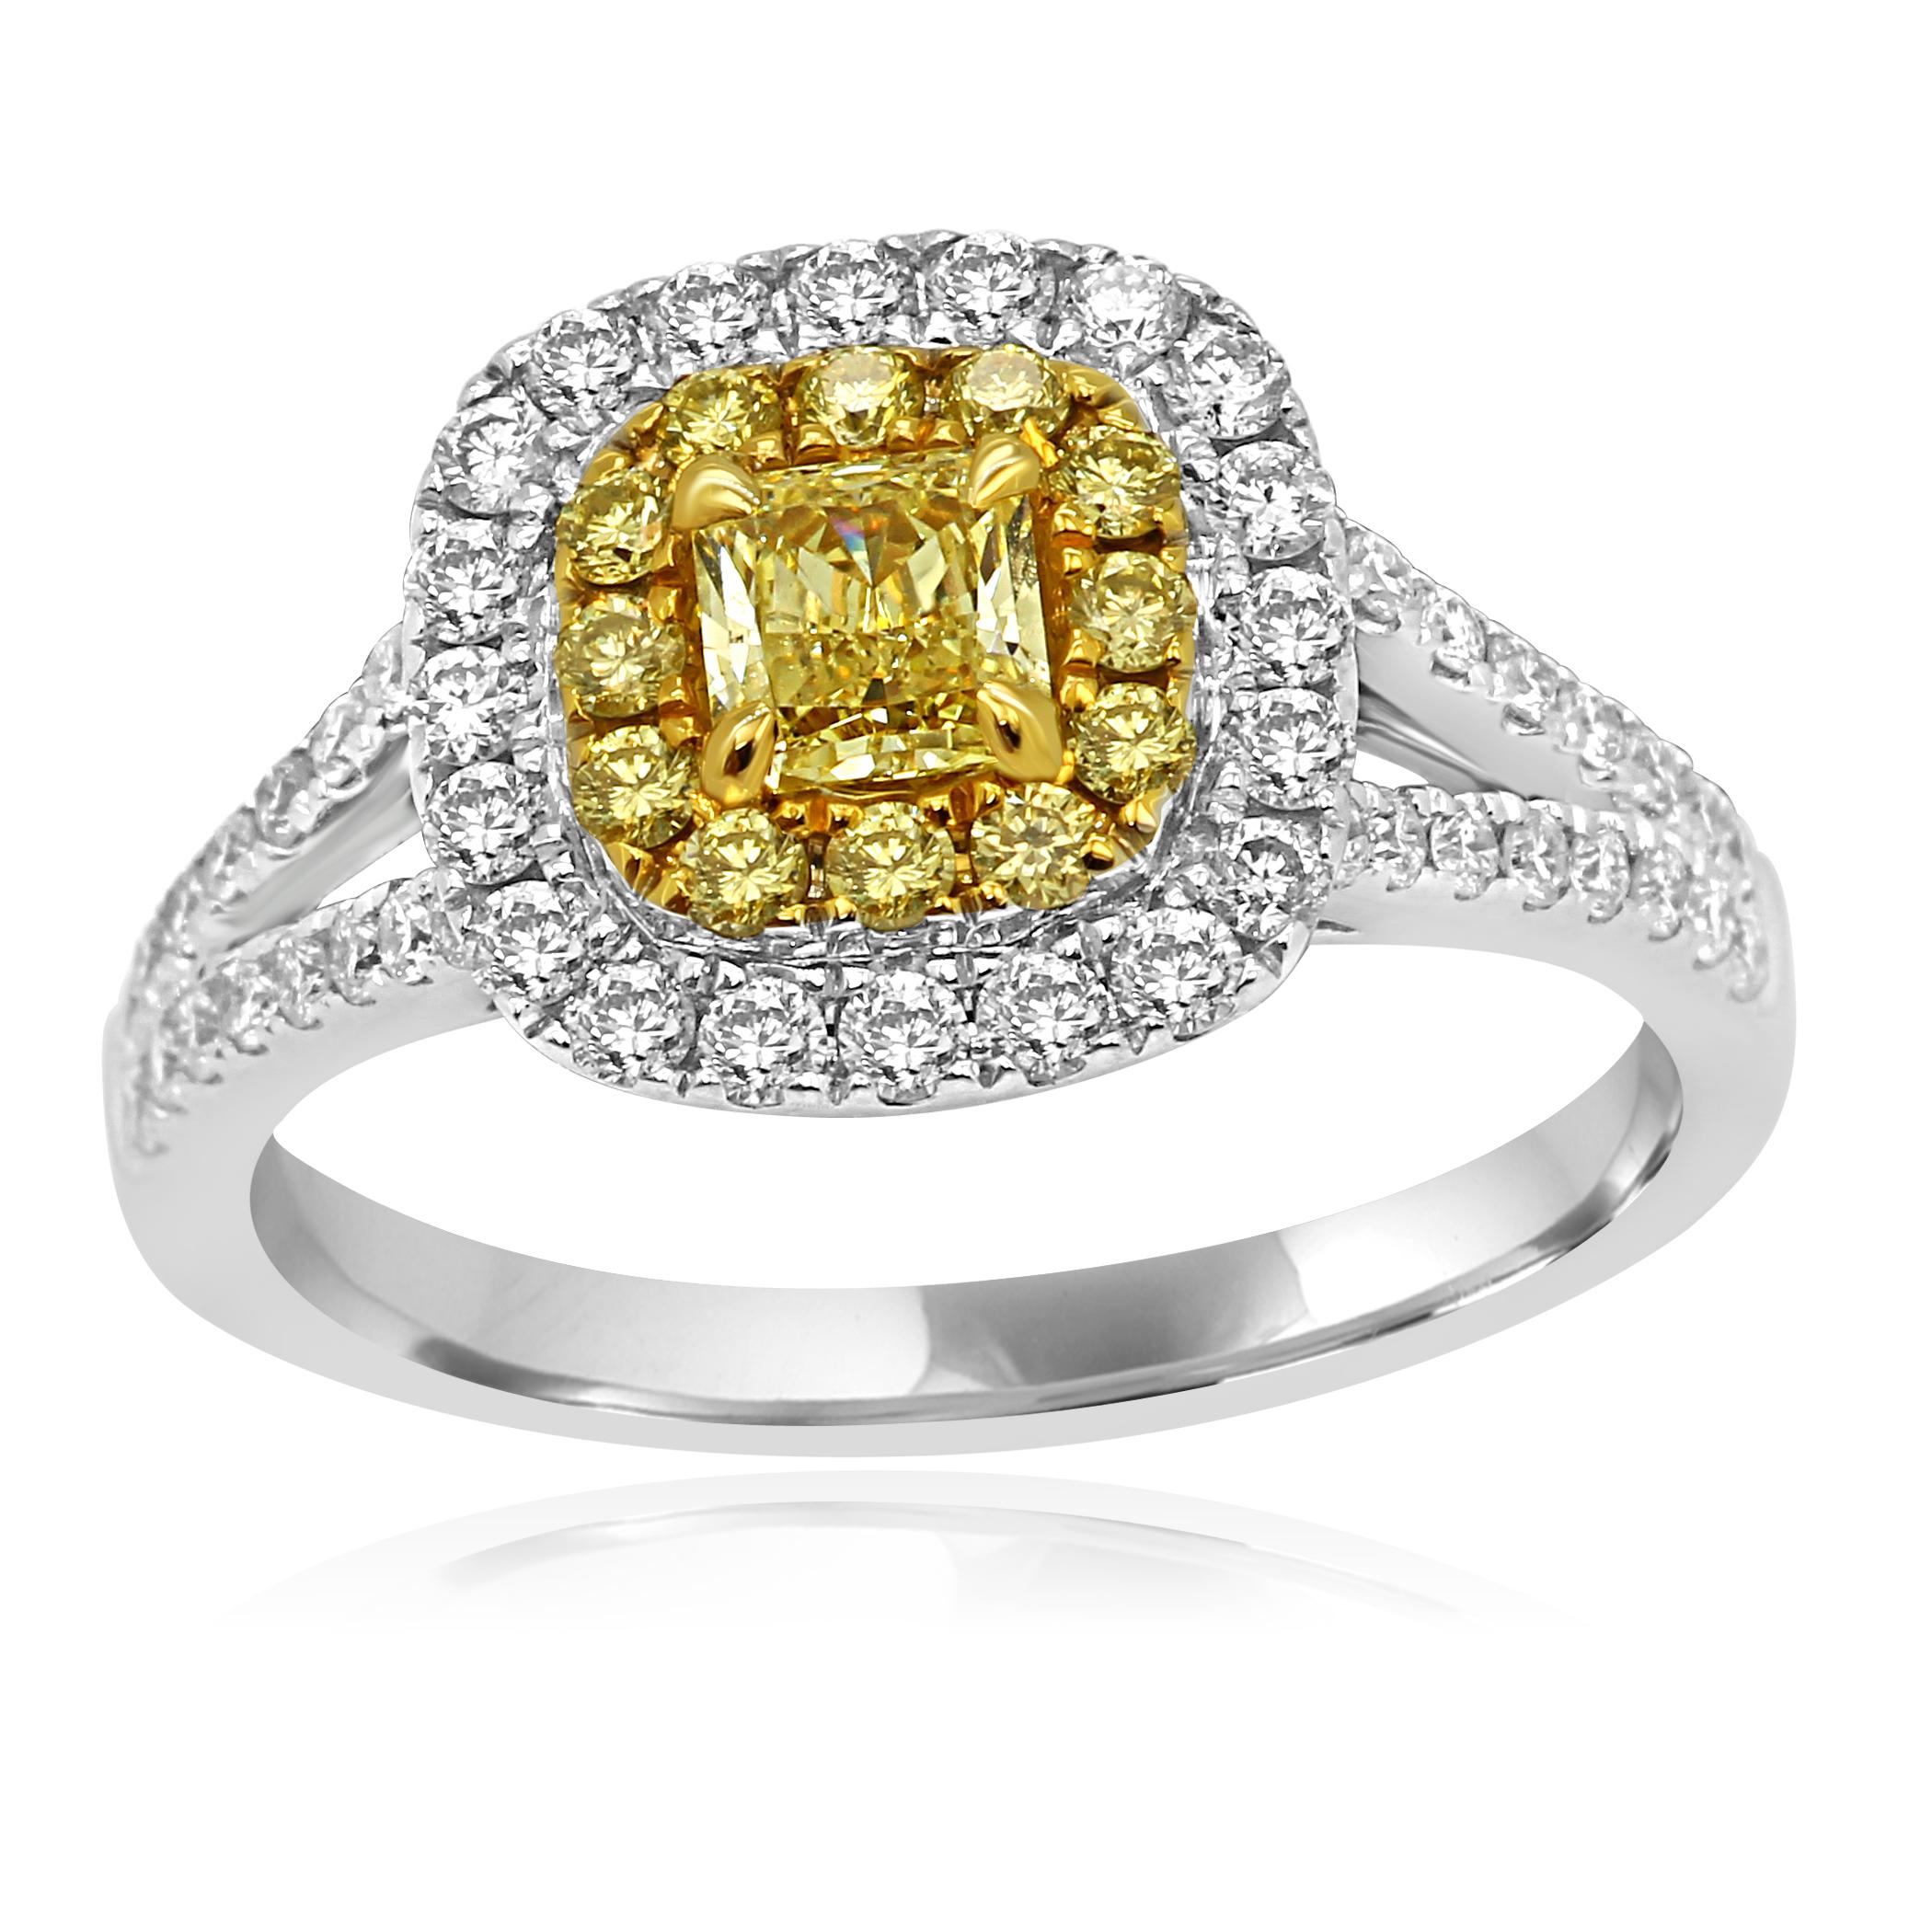 Gorgeous Natural Fancy Yellow Diamond Radiant Cut VS-SI Clarity 0.35 Carat Encircled in a Double Halo of Natural Fancy Yellow Round Brilliant Diamonds VS-SI Clarity 0.18 Carat and White Colorless Round Brilliant Diamonds VS-SI Clarity 0.52 Carat in